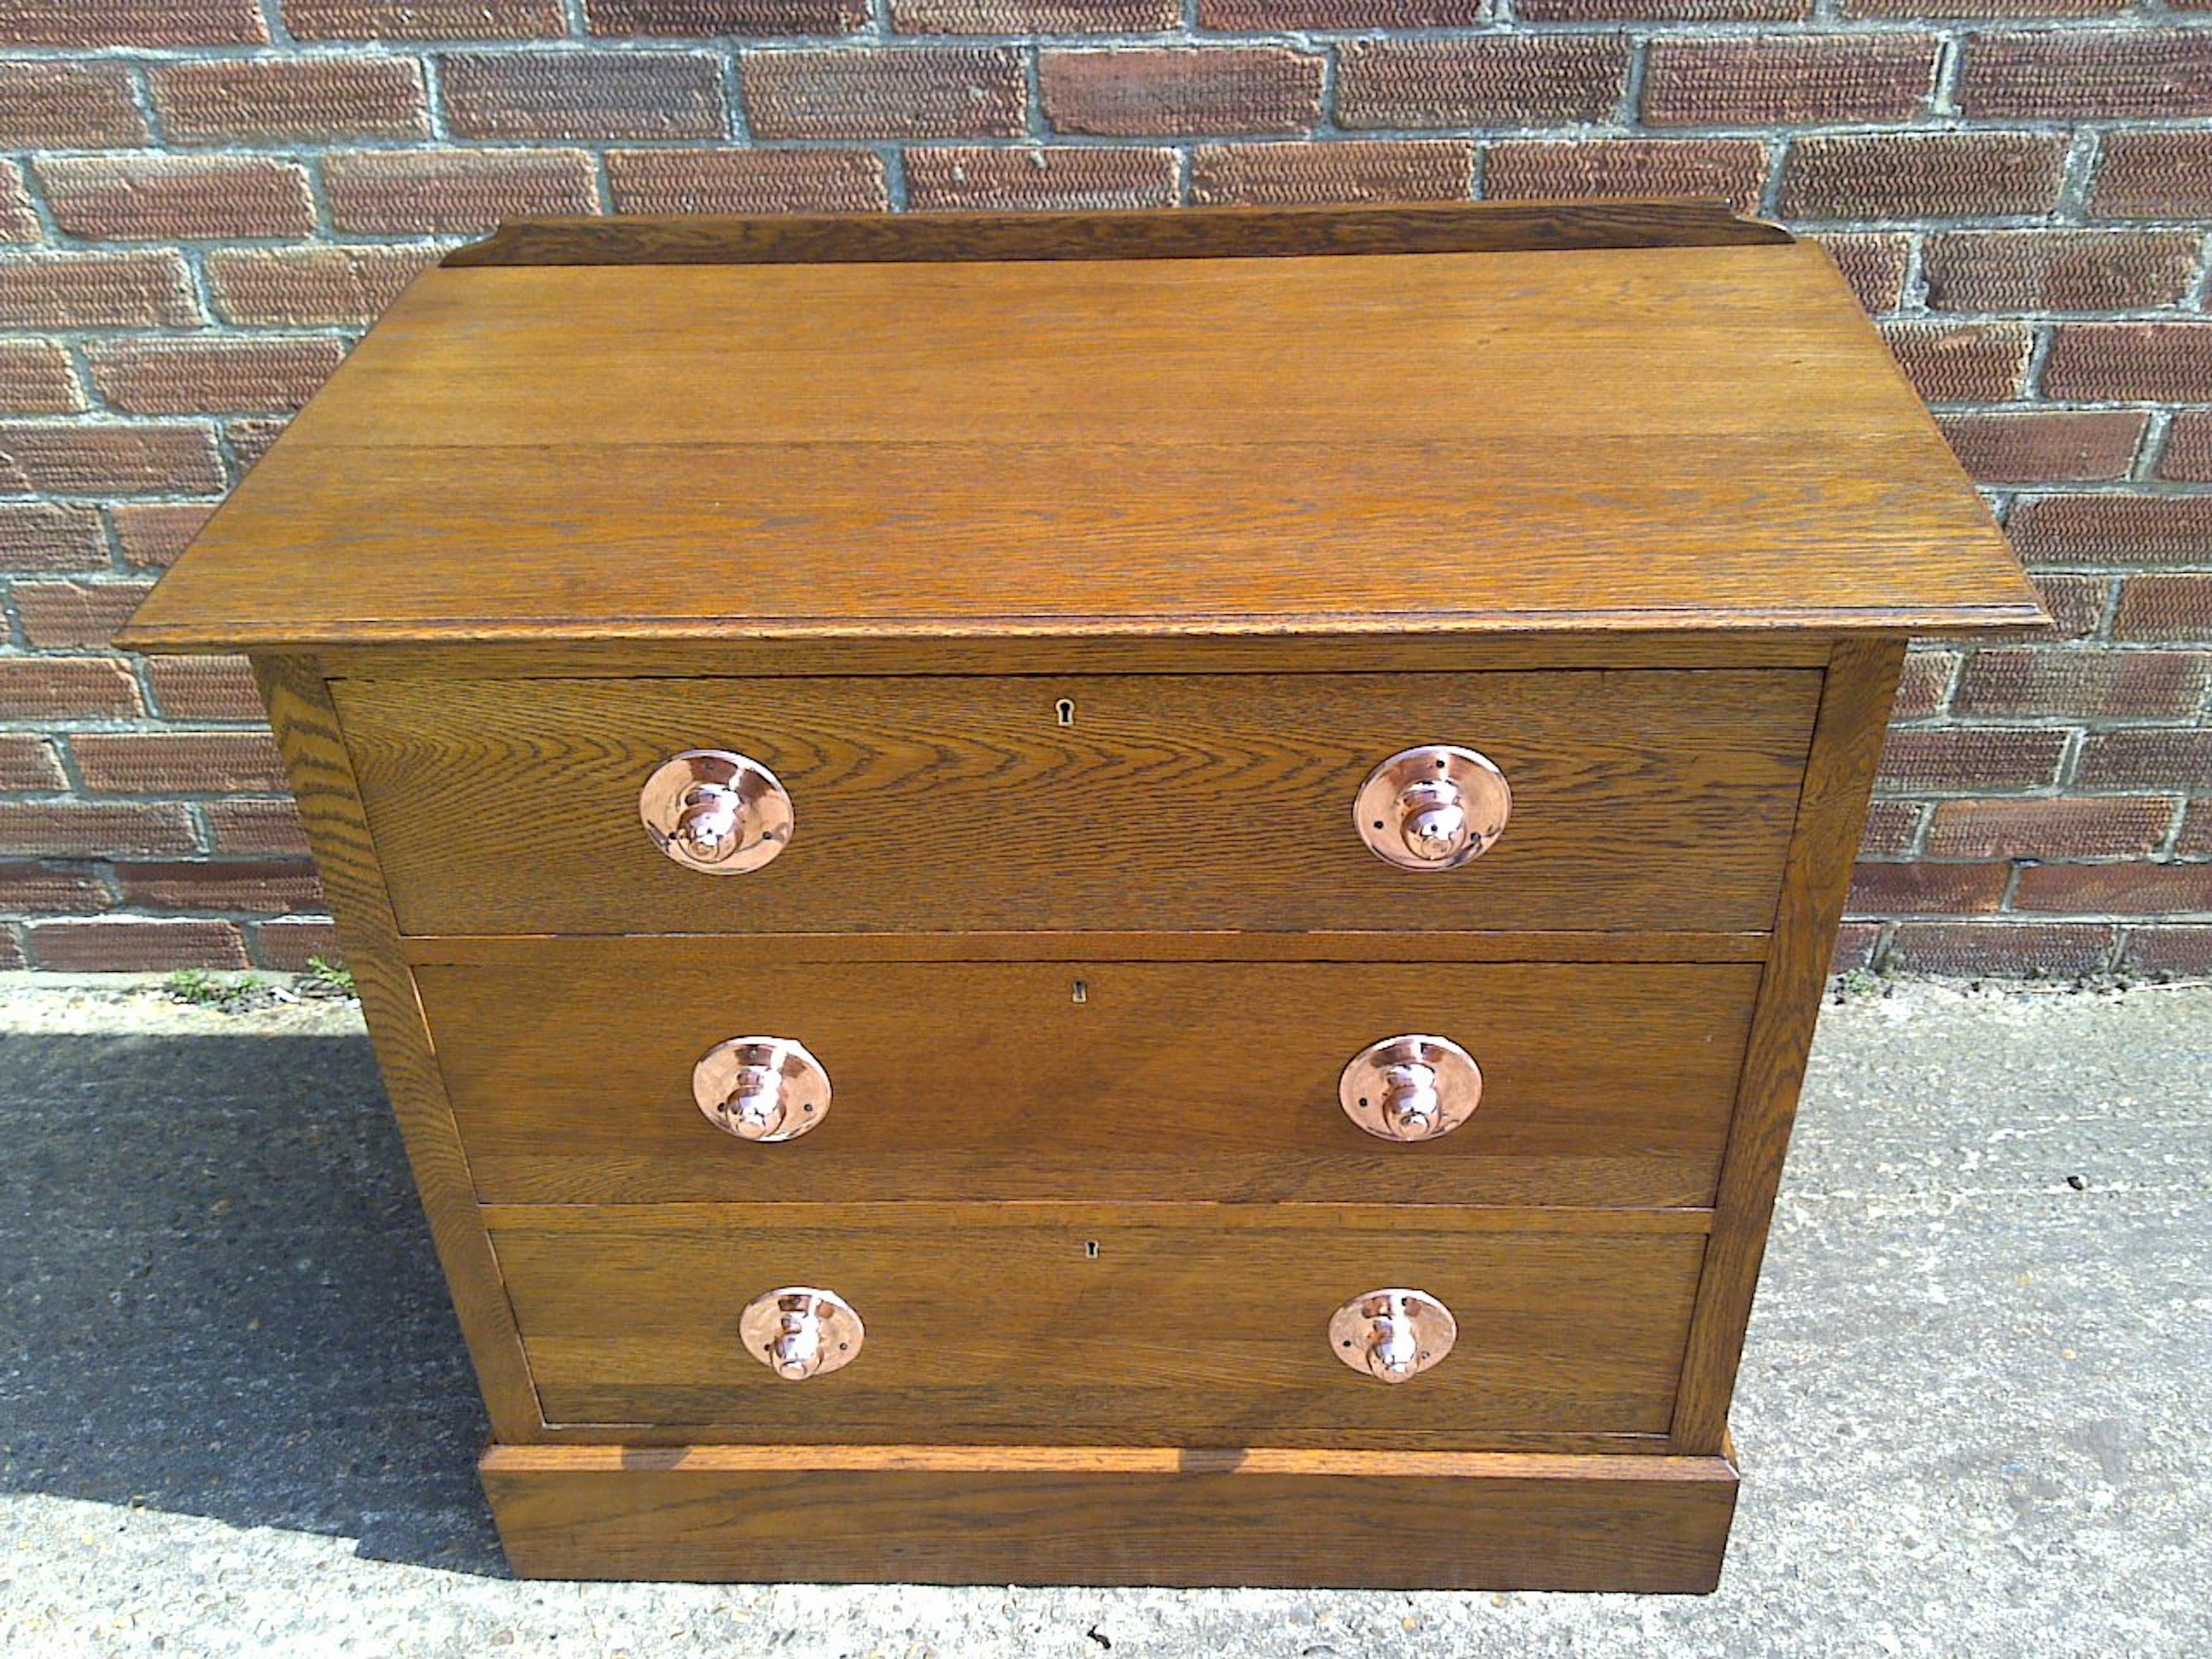 Liberty & Co attributed.
A good quality Arts and Crafts oak chest of three drawers of small proportions with circular copper handles.